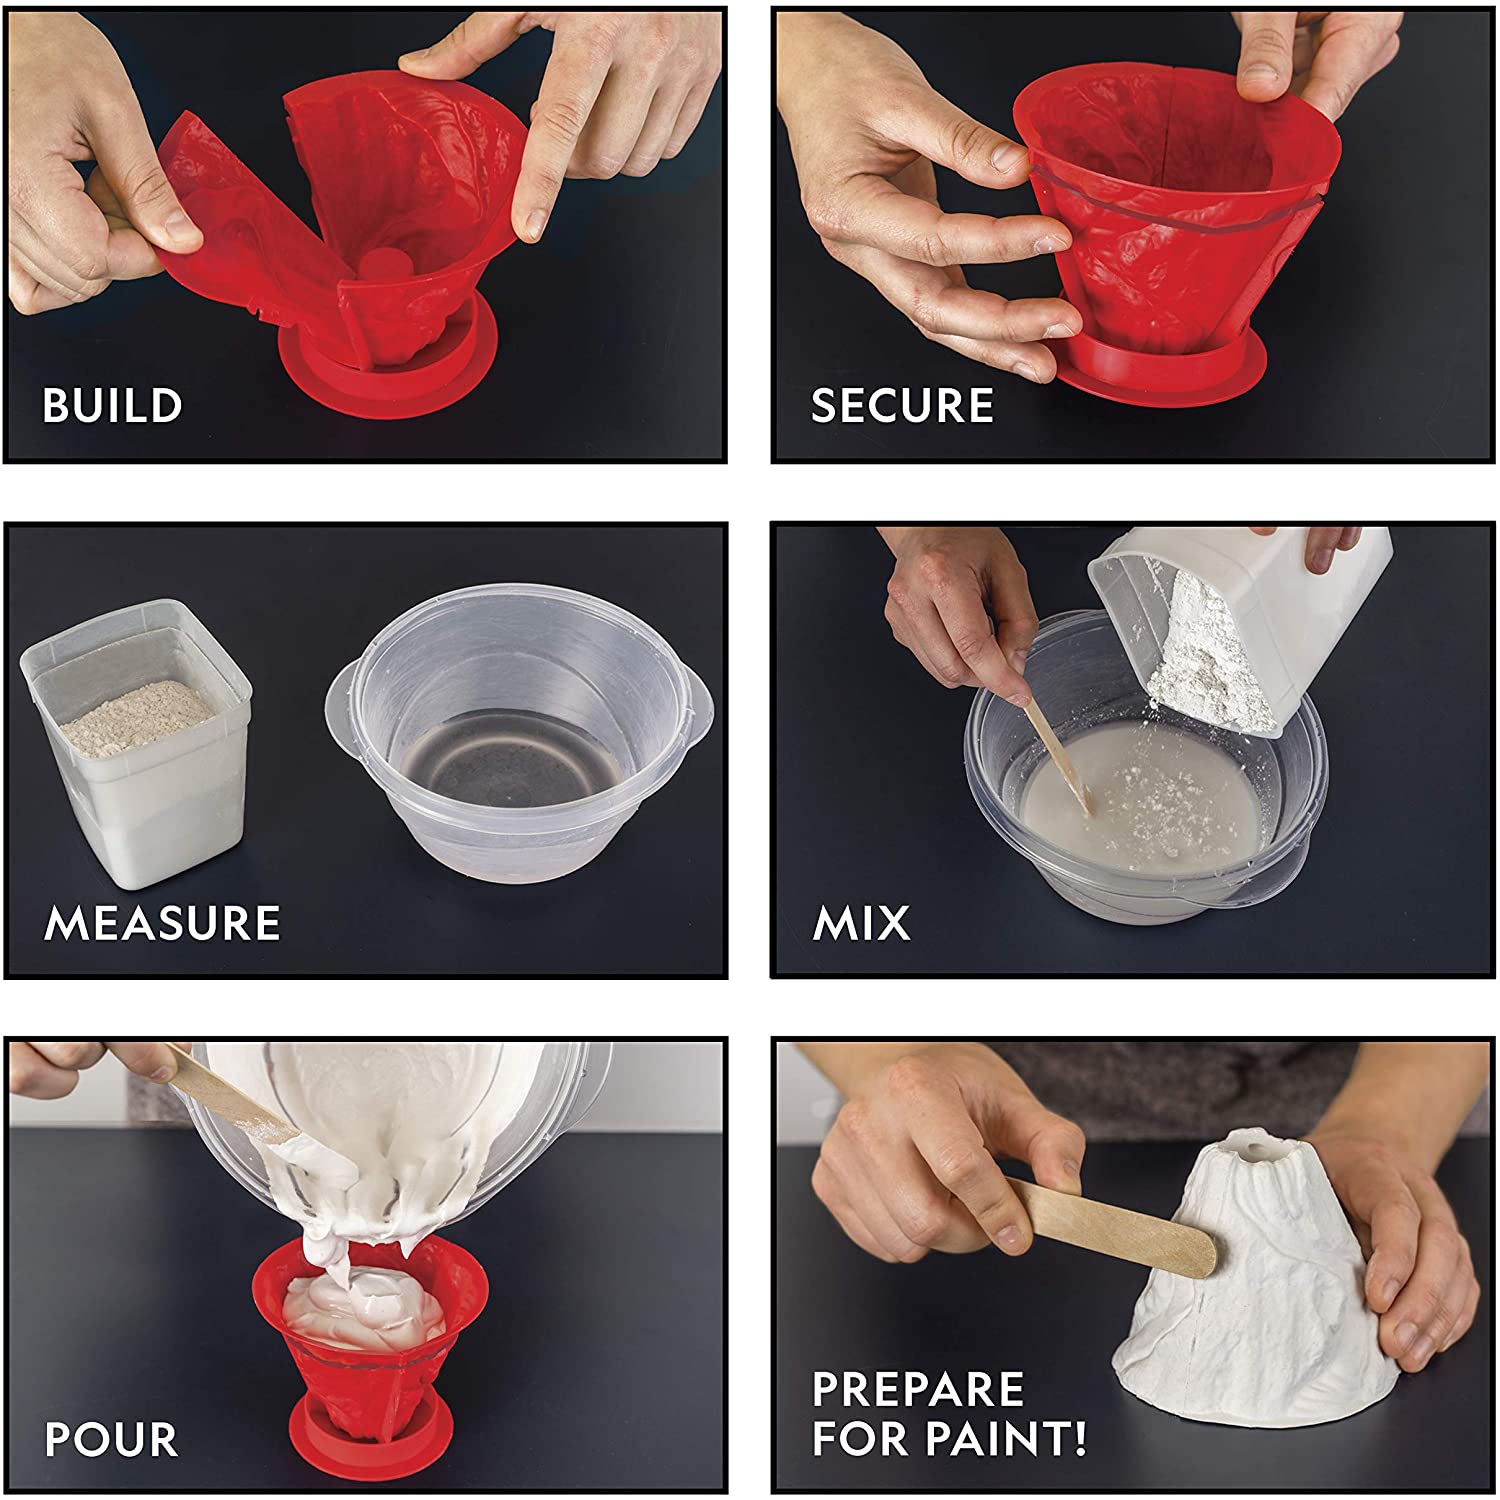 Build an Erupting Volcano with this Volcano Kit for Kids National Geographic Volcano Science Kit Multiple Eruption Experiments to Try Great for Science Projects 